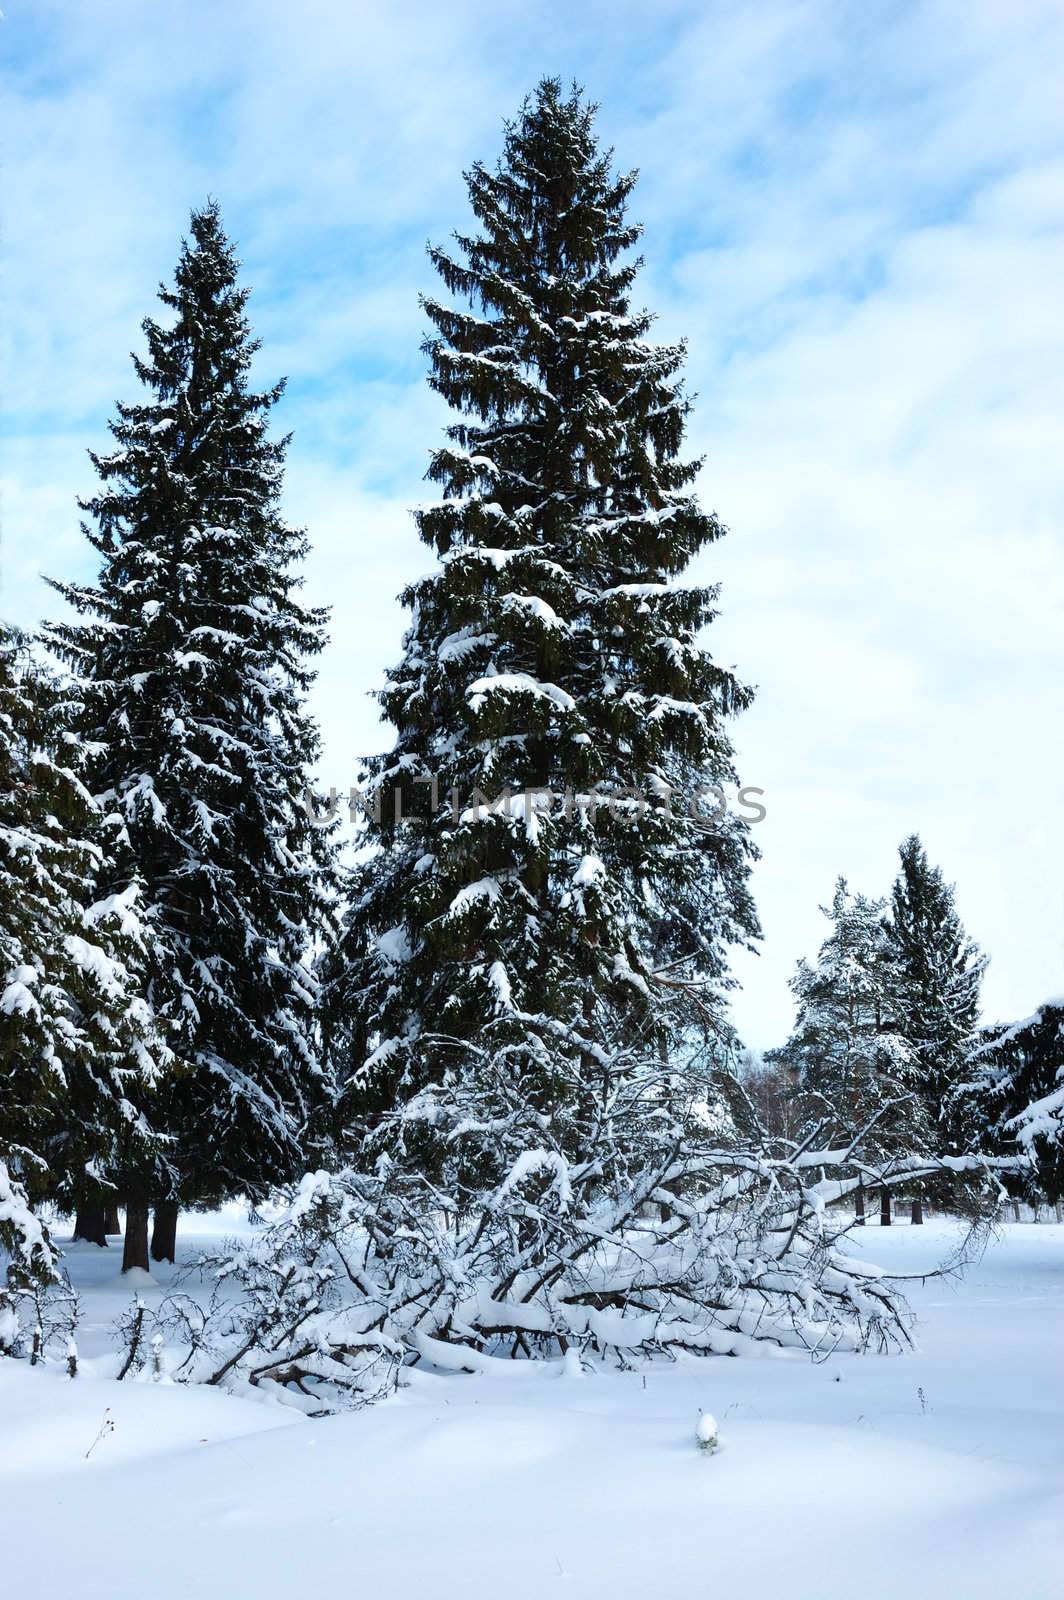 Fir trees in winter forest by wander